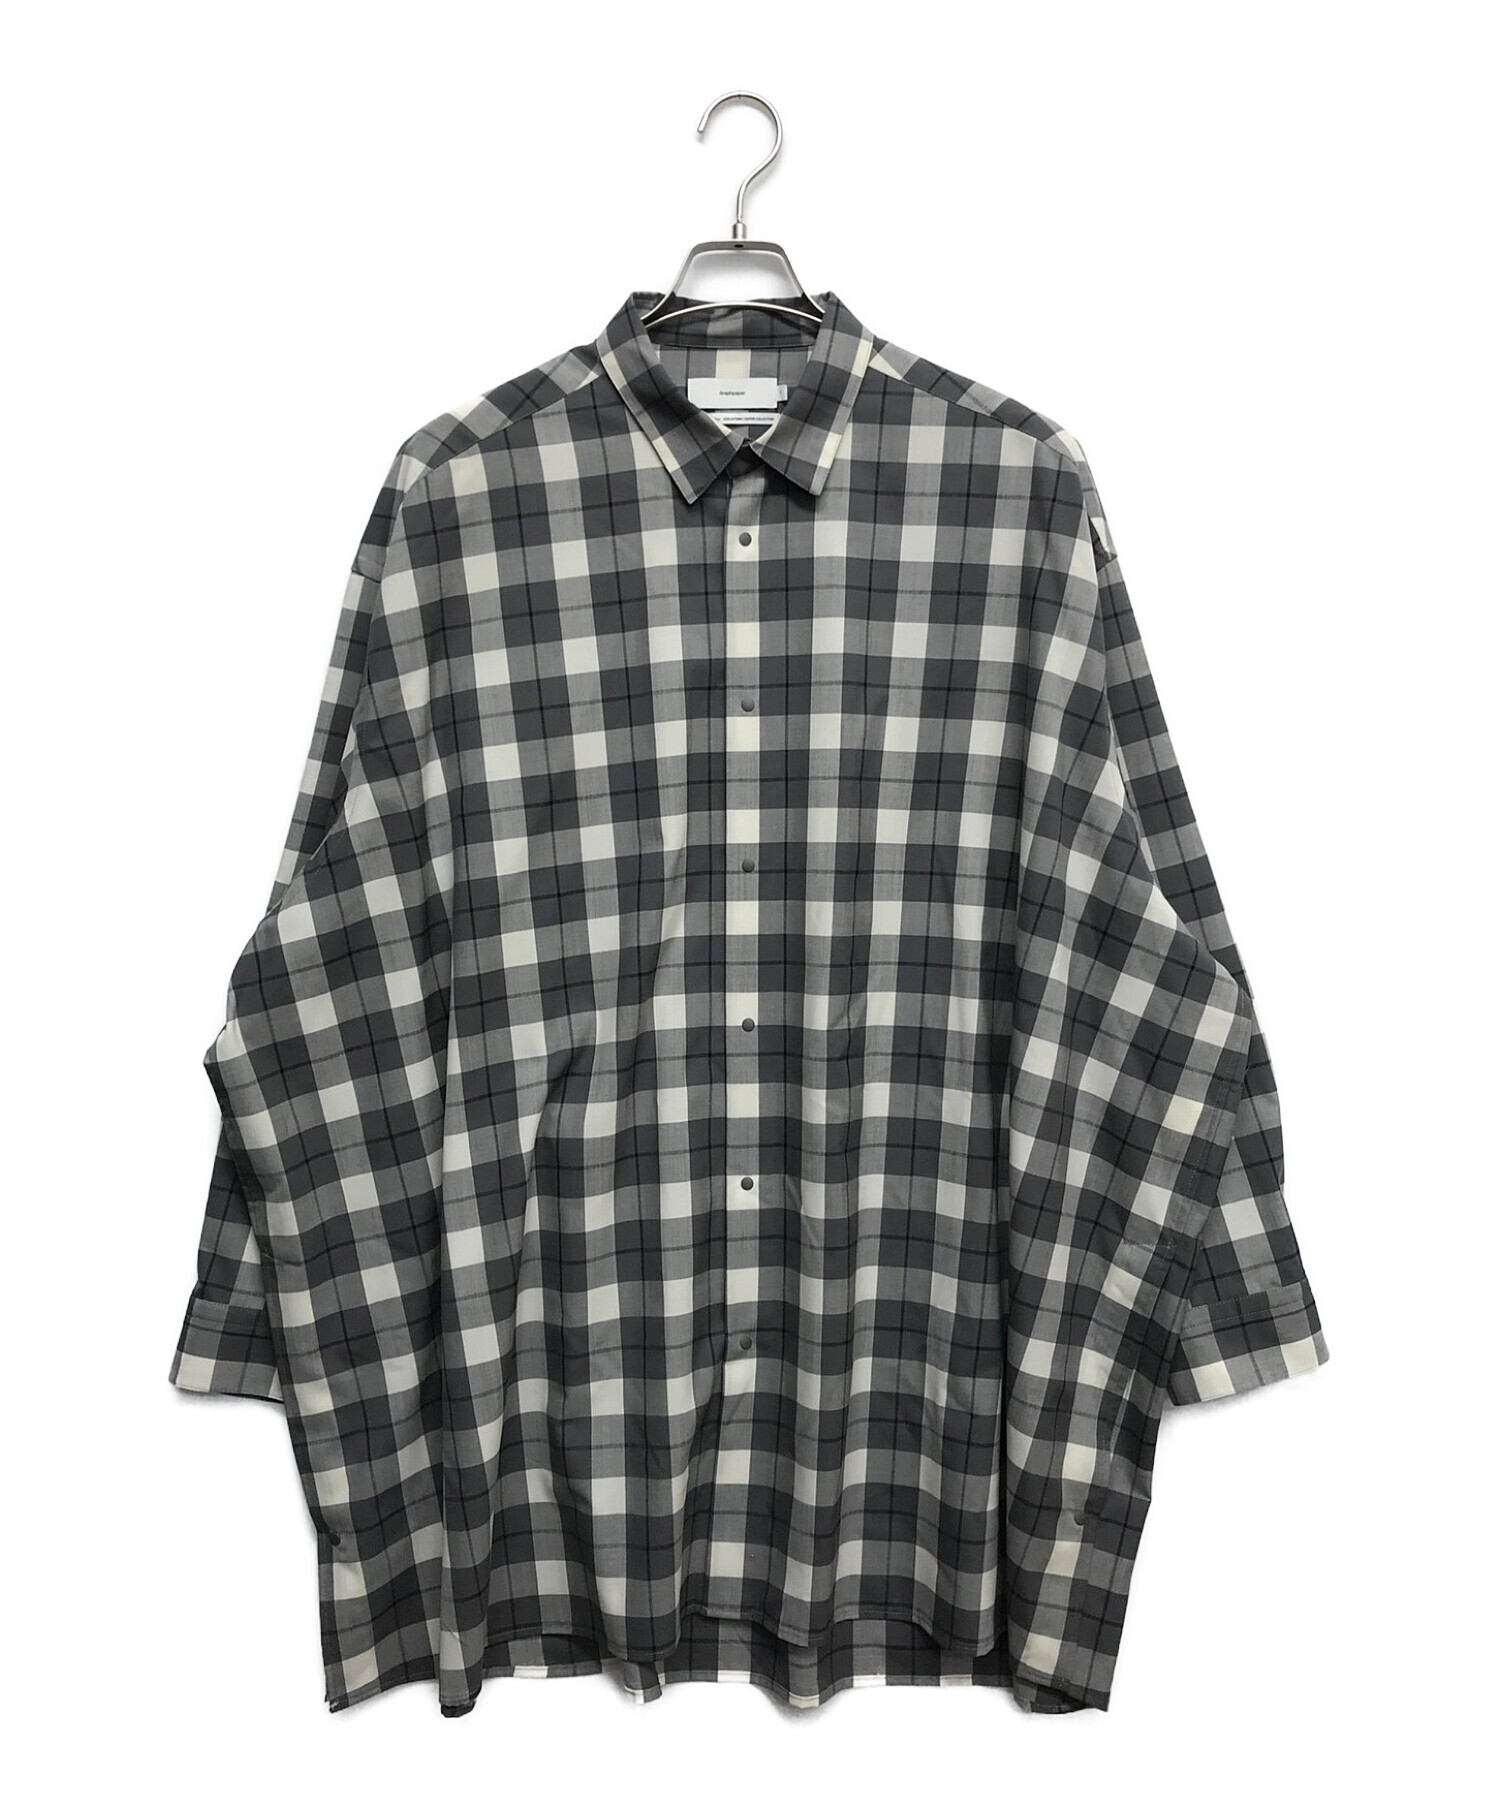 Graphpaper◇Marzotto Gingham Oversized Shirt/GM194-50507/ギンガム